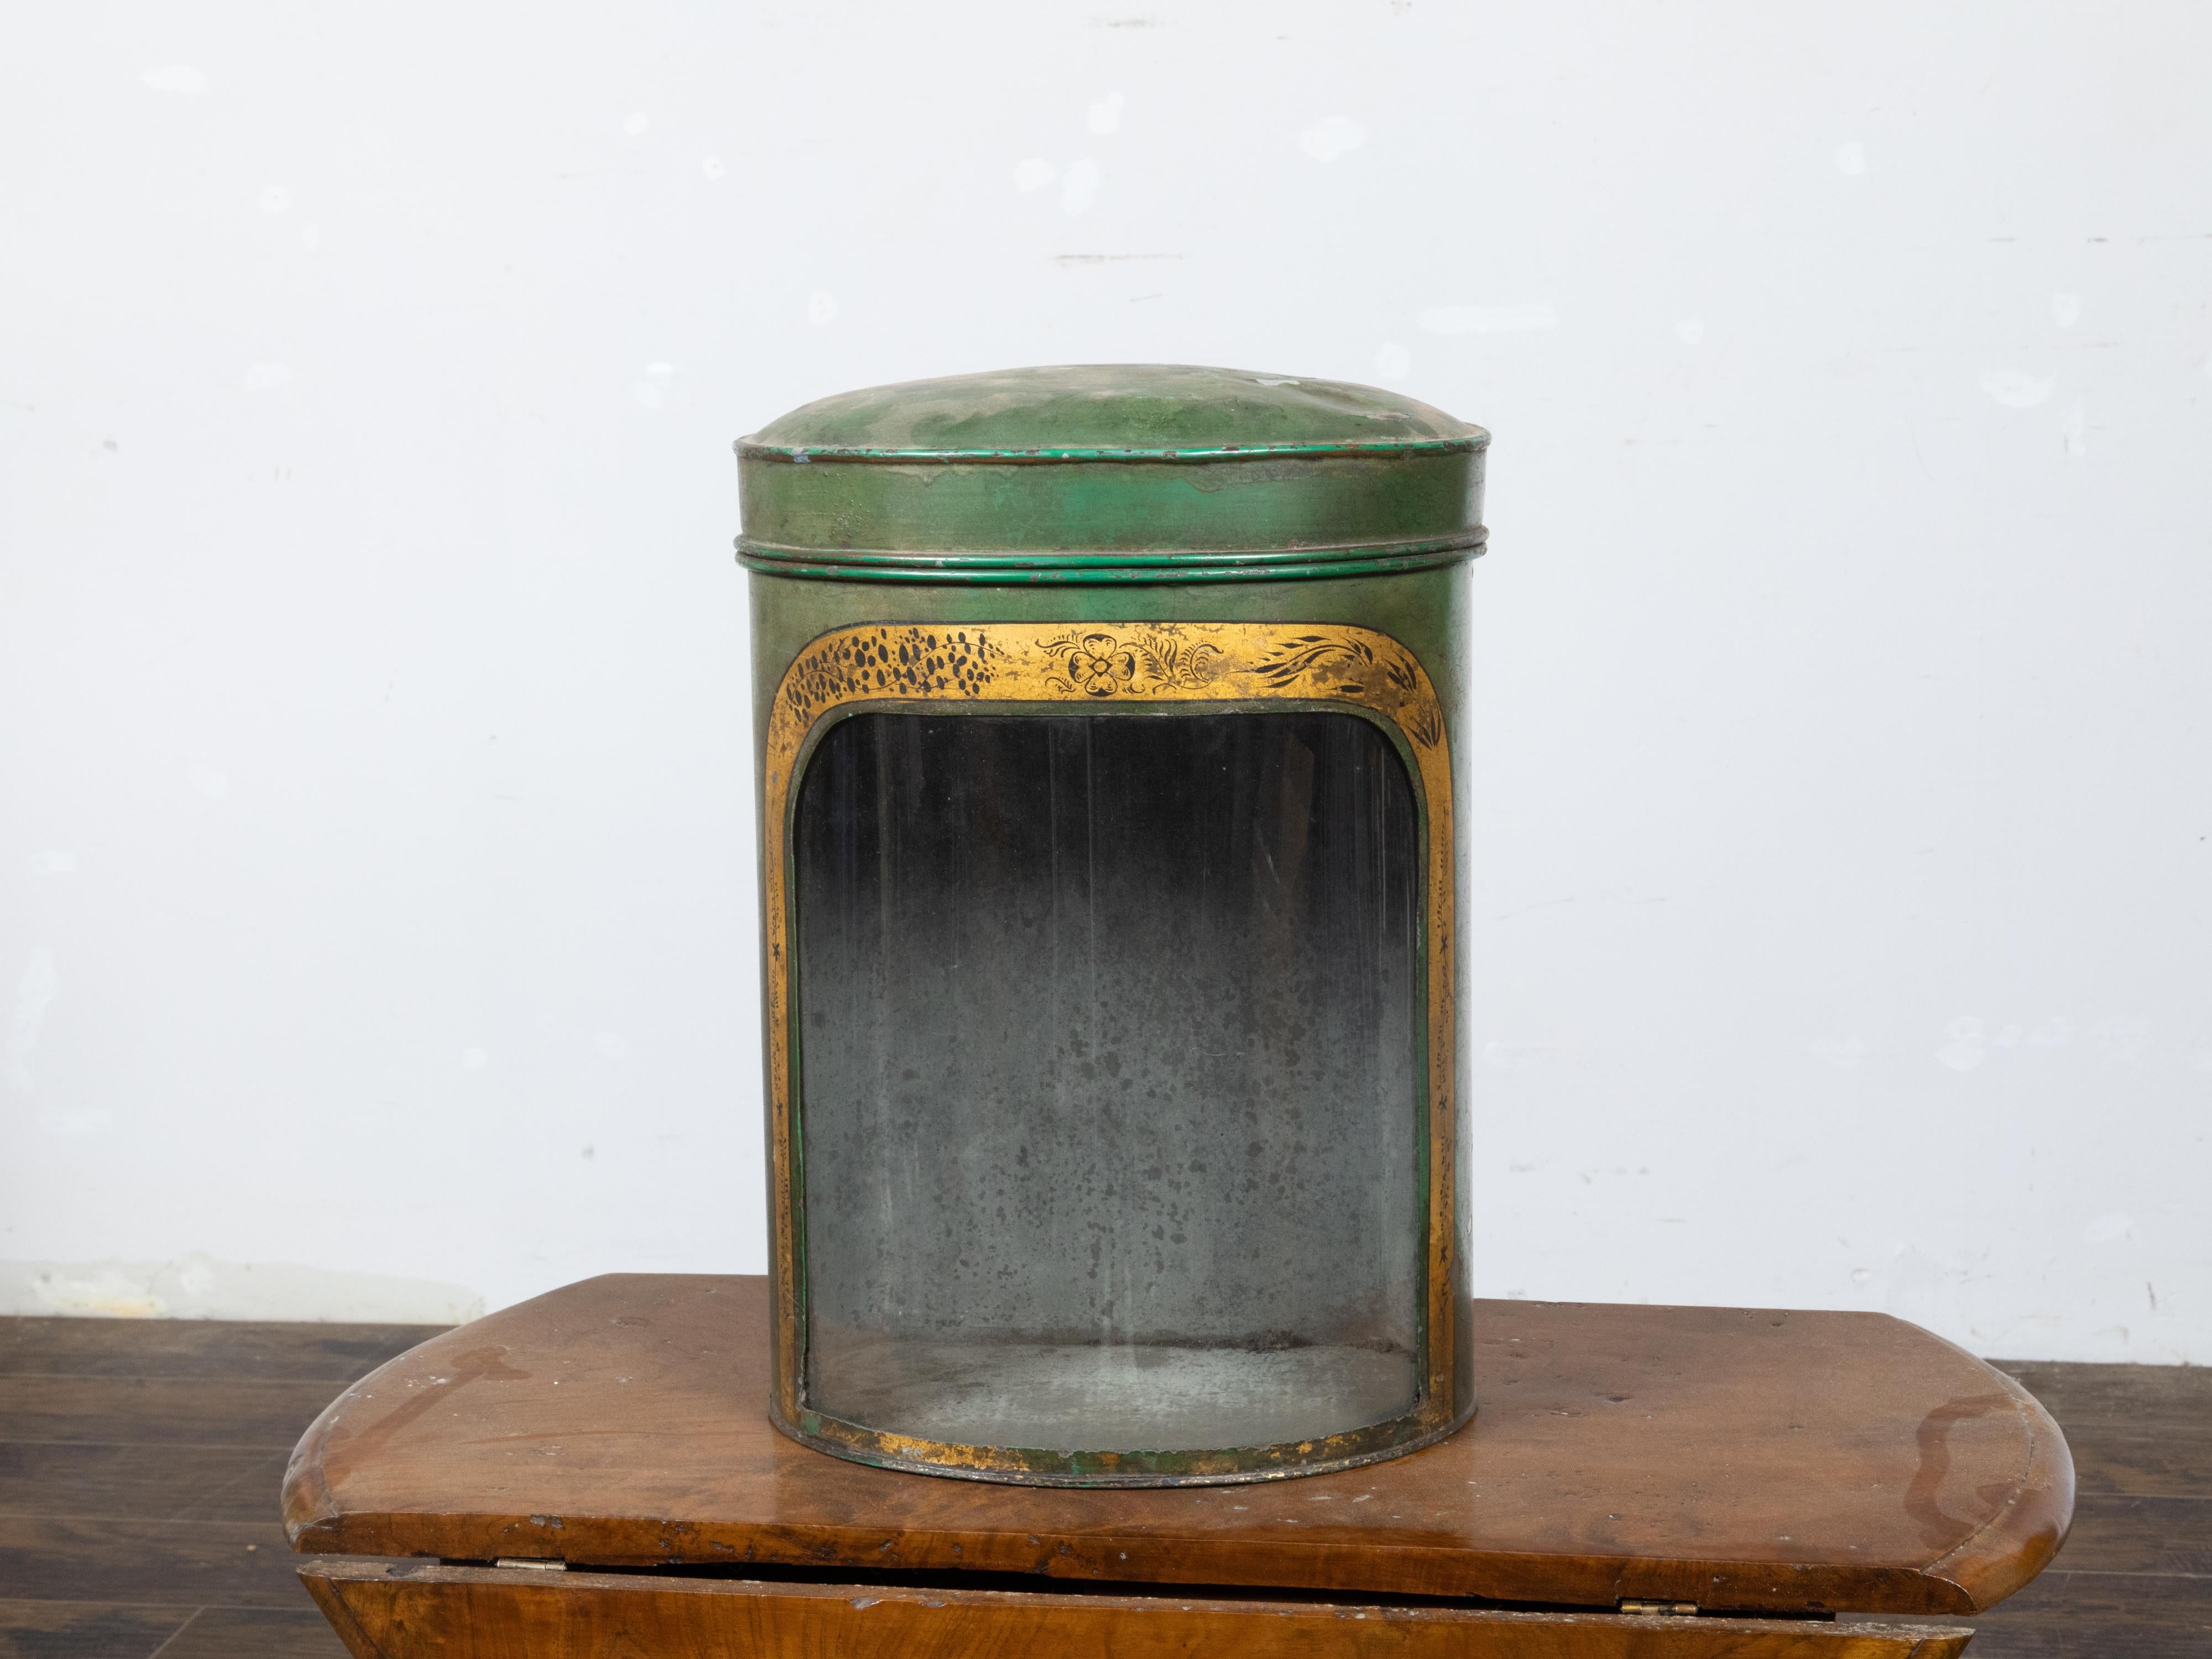 An English Parnall & Son green painted metal tea box from the 19th century with gilt painted floral frieze, glass front flat back and maker's mark. This English Parnall & Son green painted metal tea box, originating from the 19th century, showcases